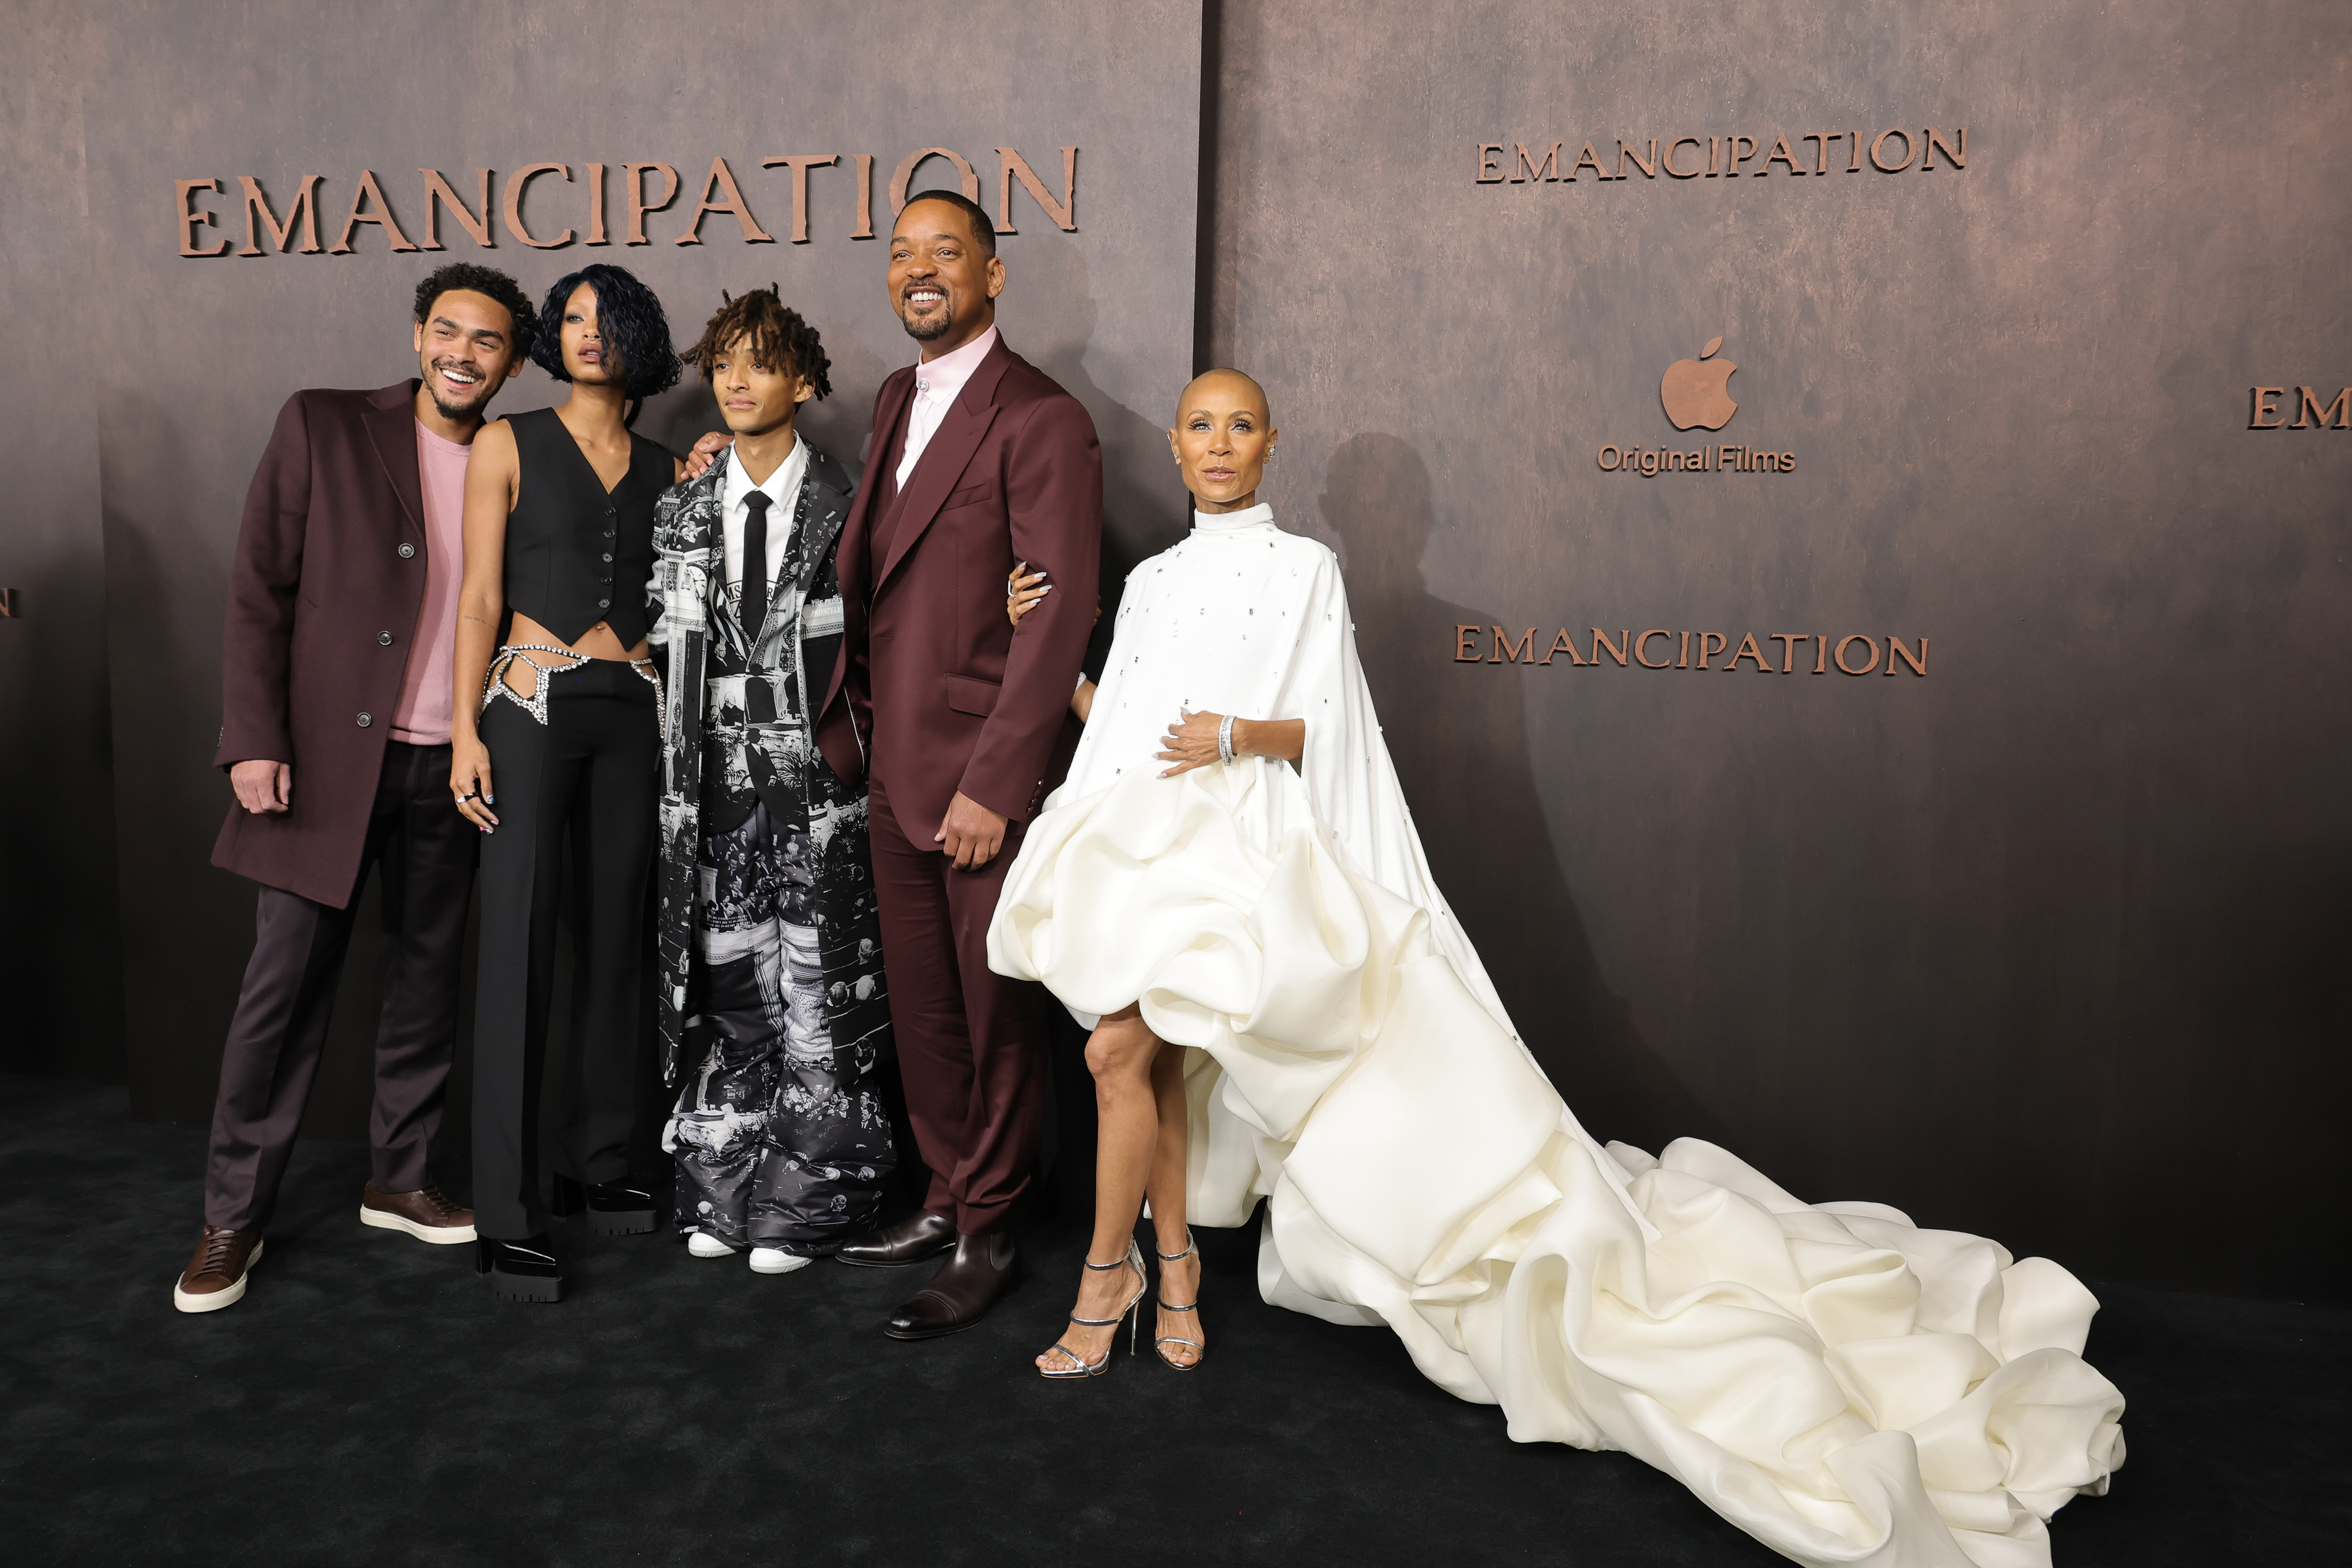 (L-R) Trey Smith, Willow Smith, Jaden Smith, Will Smith, and Jada Pinkett Smith attend the premiere of Apple Original Films' "Emancipation" at Regency Village Theatre, on November 30, 2022, in Los Angeles, California.| Source: Getty Images